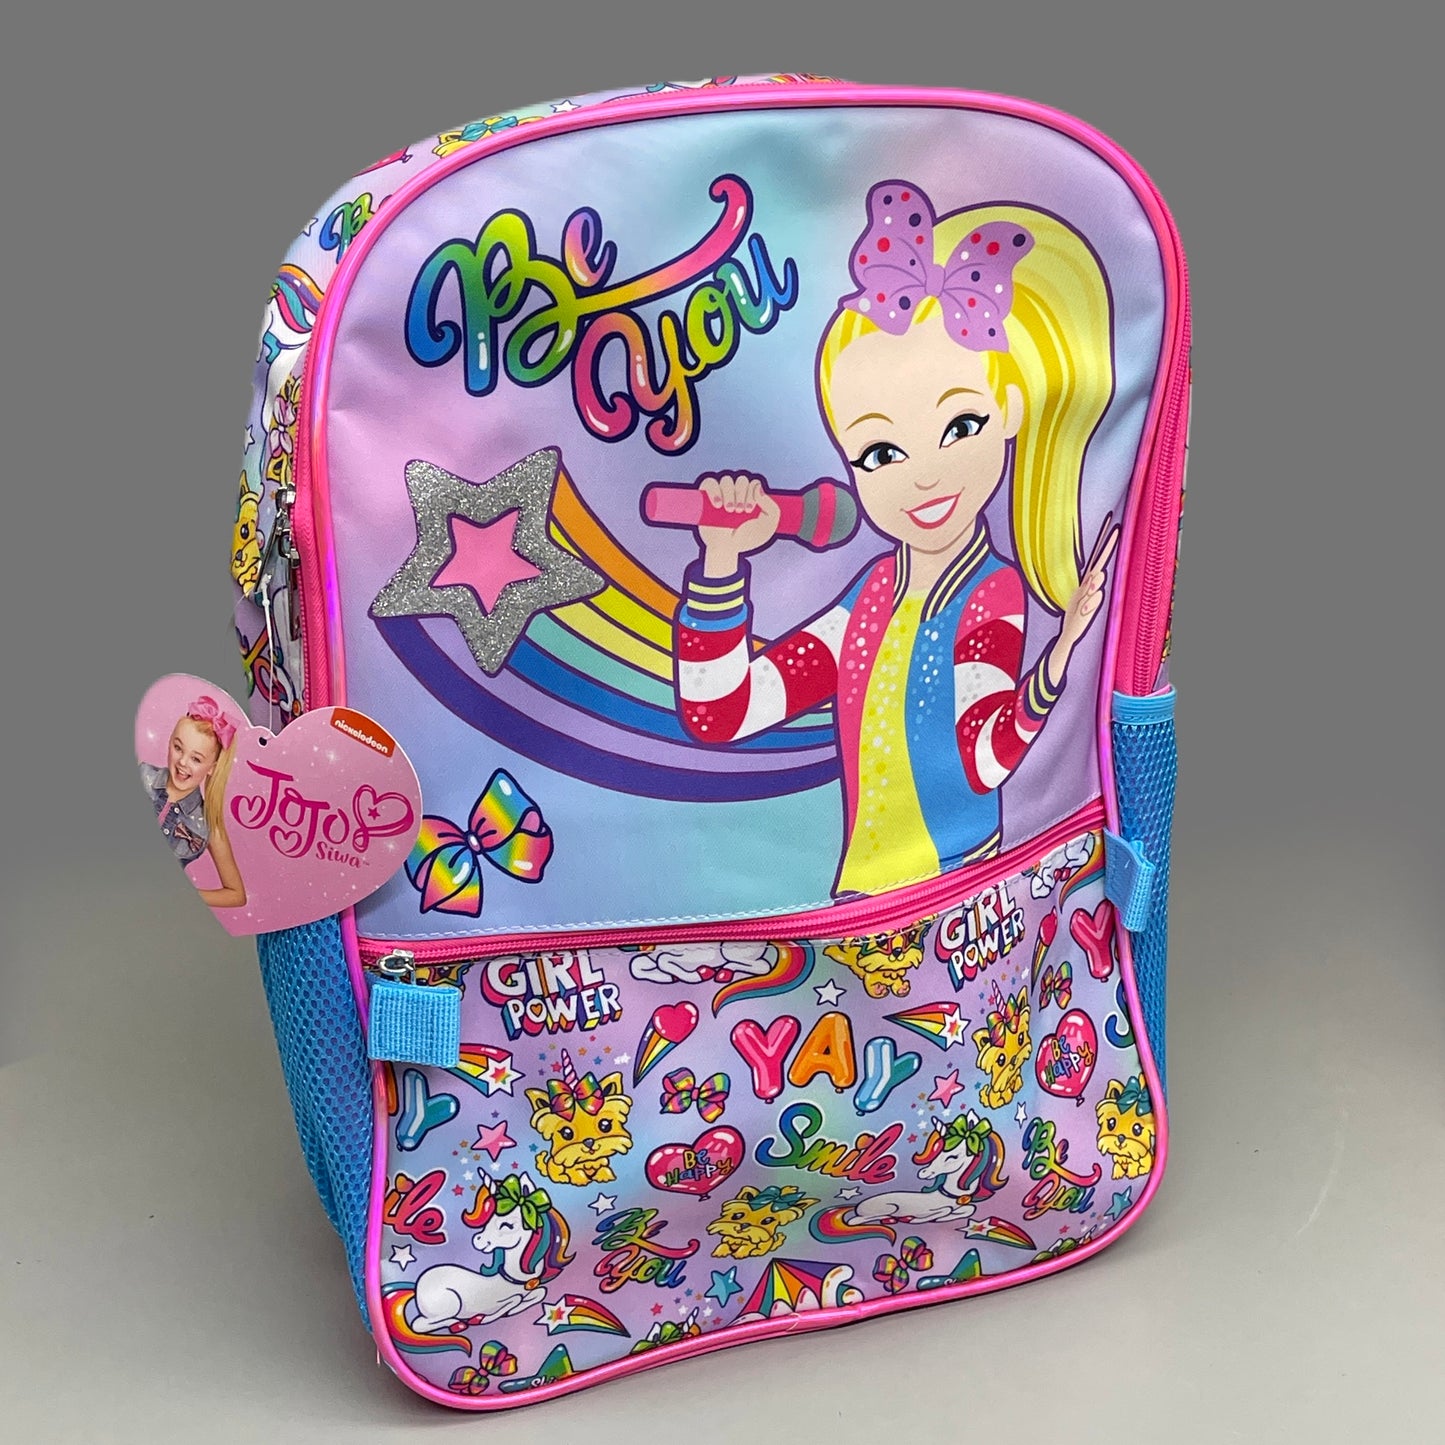 ACCESSORY INNOVATIONS JOJO Siwa Nickelodeon “Be You” Backpack & Lunch Bag Pink